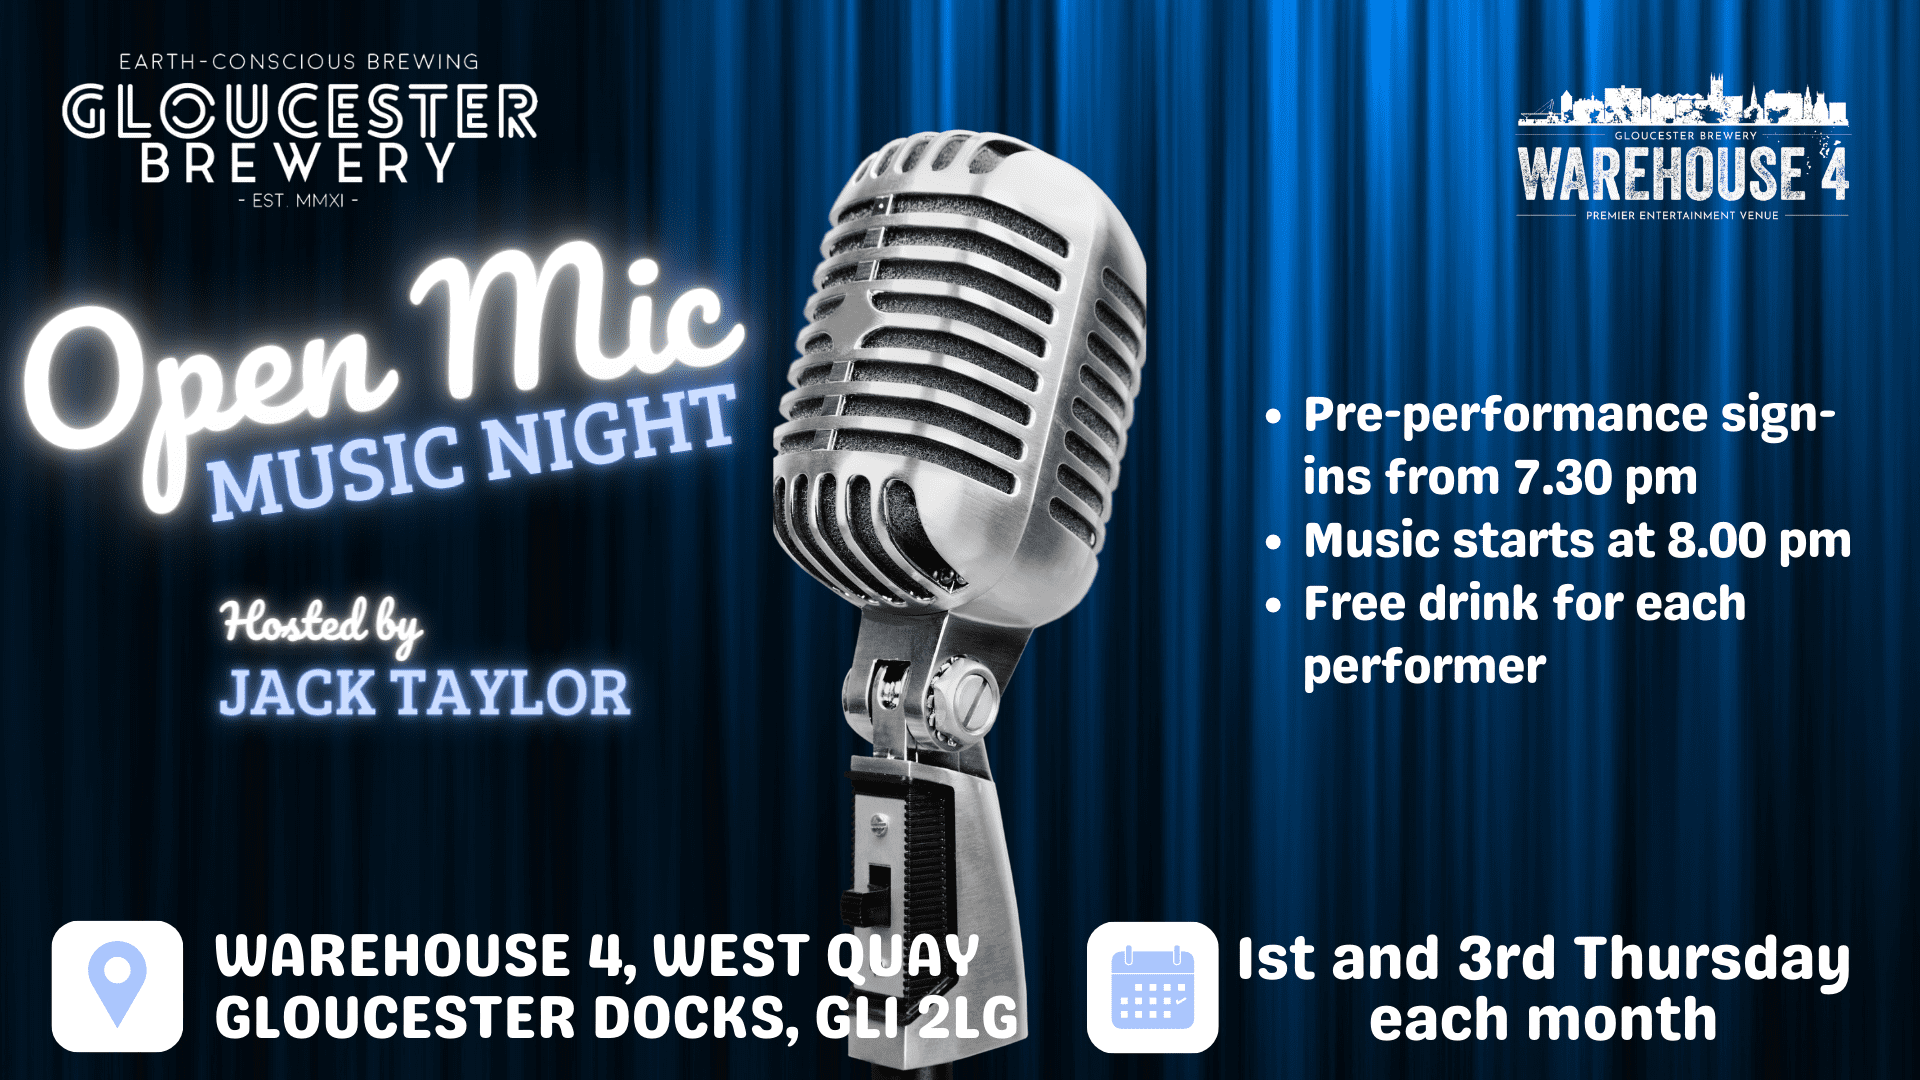 Gloucester Brewery - Warehouse 4 Taproom - Open Mic Nights